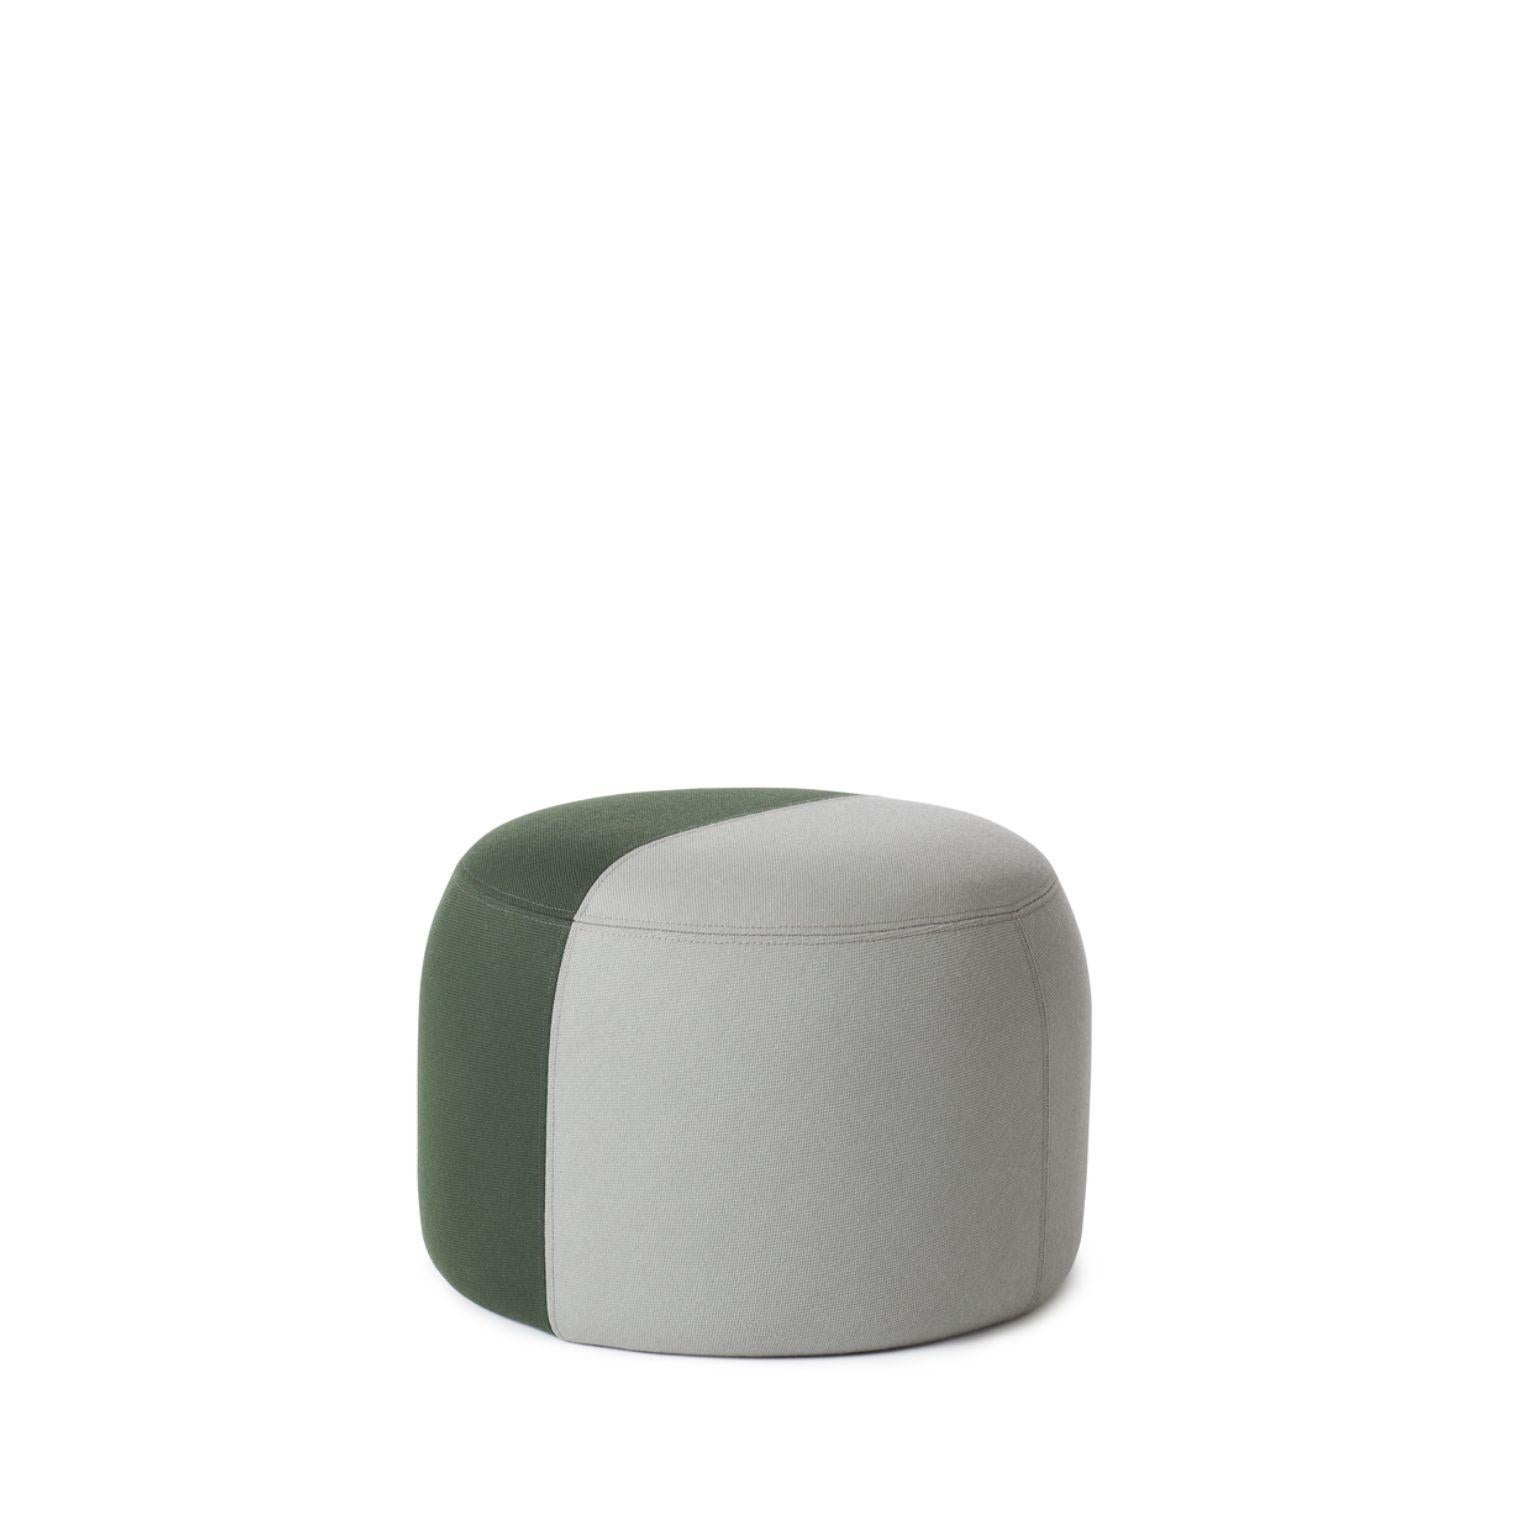 Dainty pouf warm grey forest green by Warm Nordic
Dimensions: D55 x H 39 cm
Material: Textile upholstery, Wooden frame, foam.
Weight: 9.5 kg
Also available in different colours and finishes. 

Sophisticated, two-coloured pouf with soft shapes